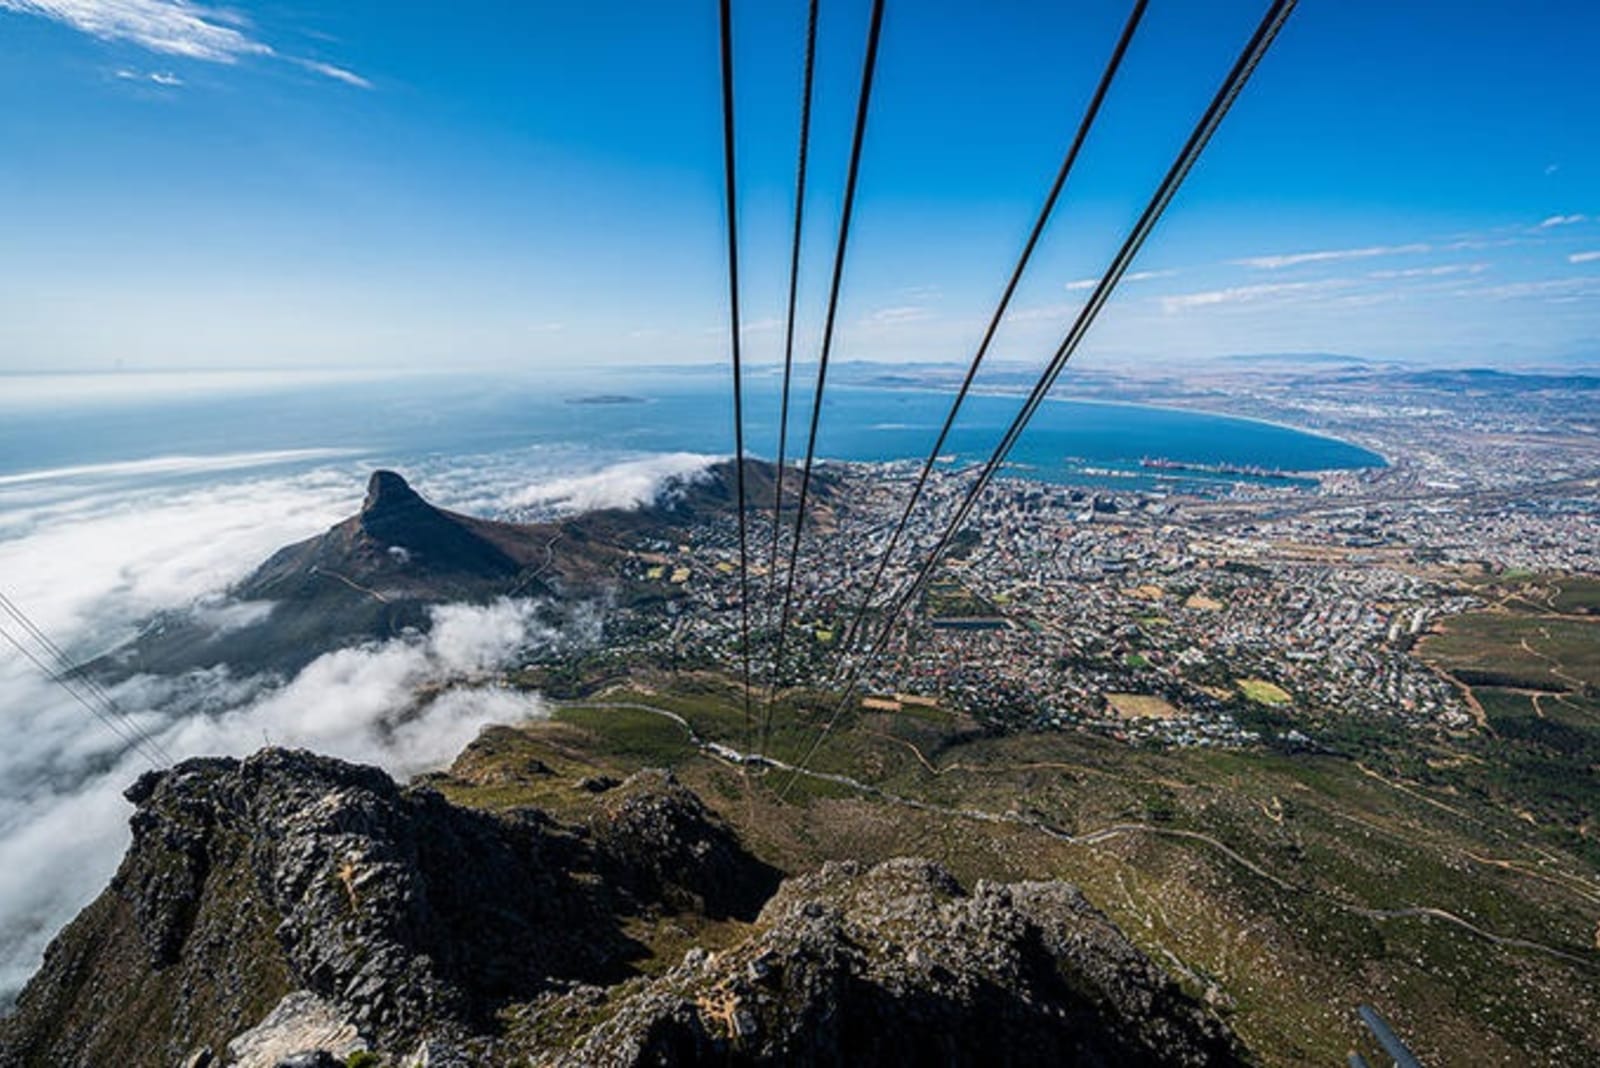 rs-2-table-mountain-cableway-shutterstock_1841829463.jpg